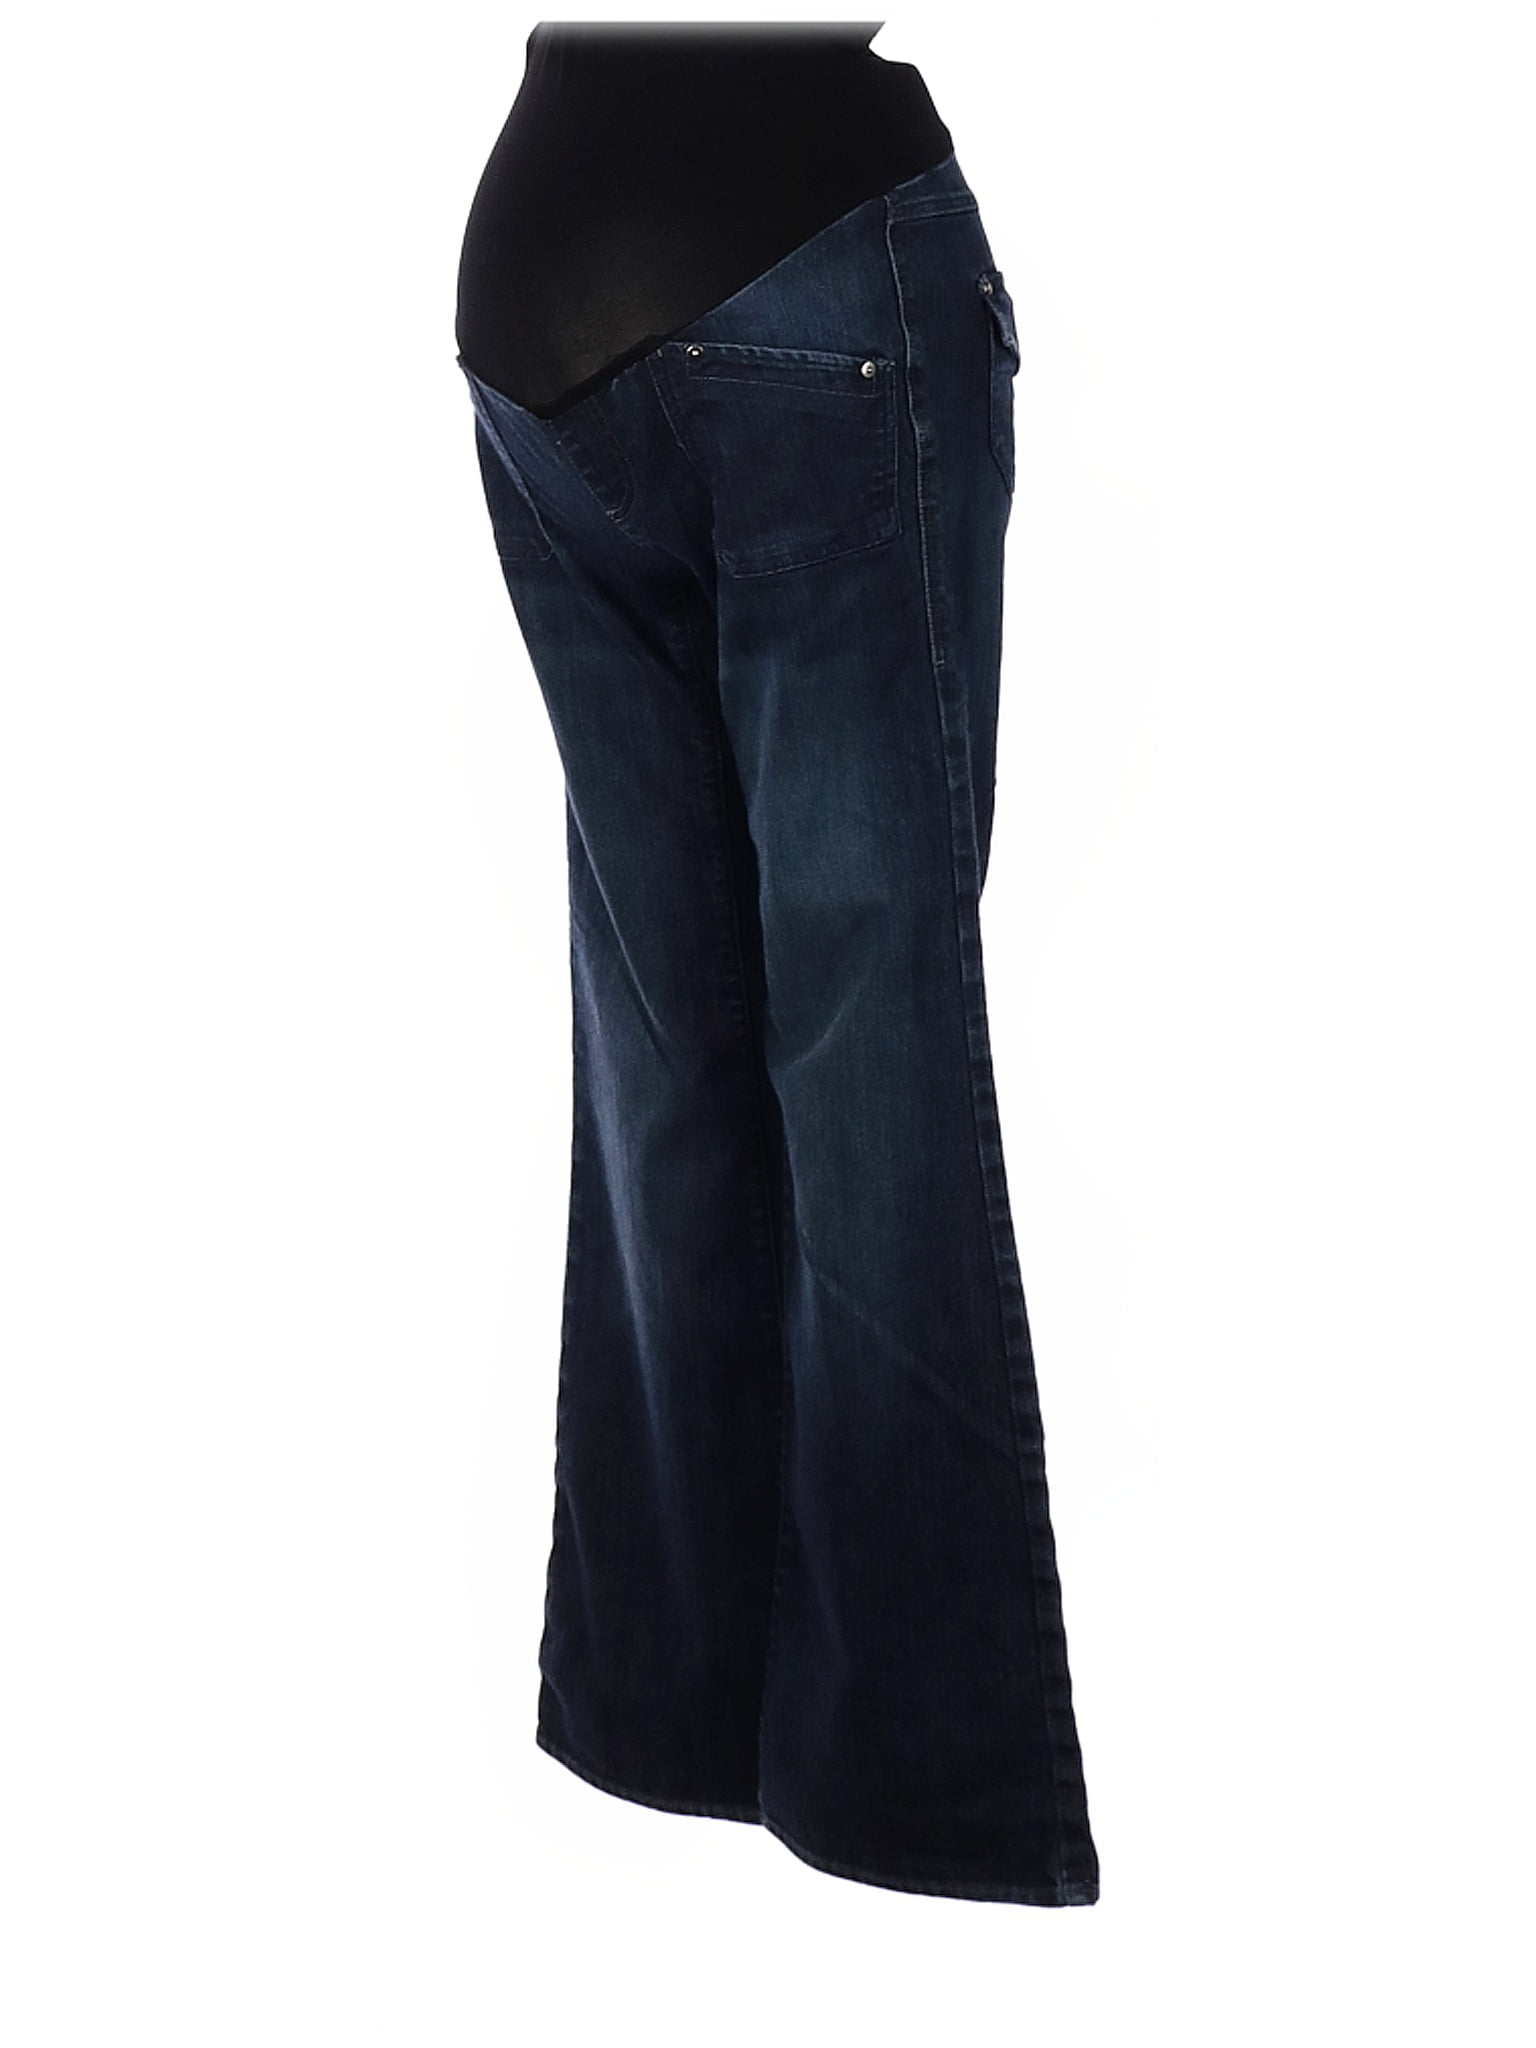 Rumor Has It Over-Belly Maternity Flare Jeans